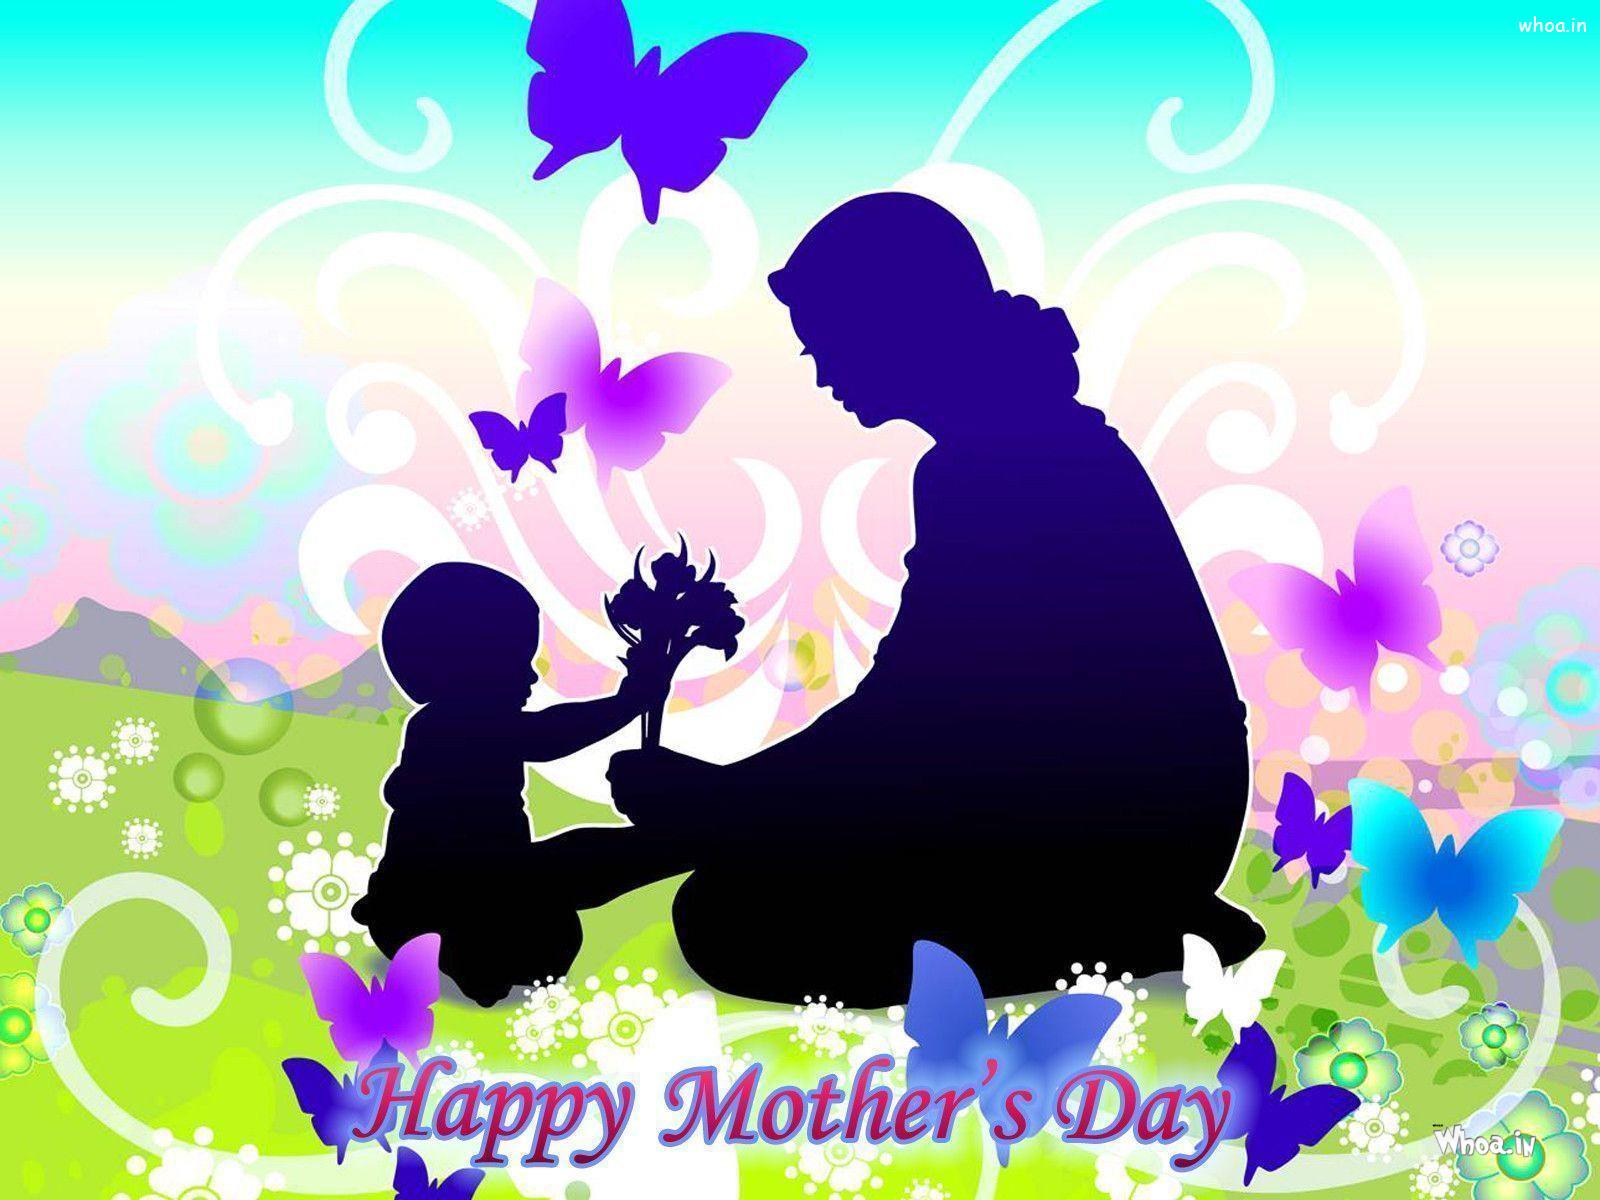 Happy Mother''s Day Wishes Images & Hd Wallpapers Mother''s Day Greetings